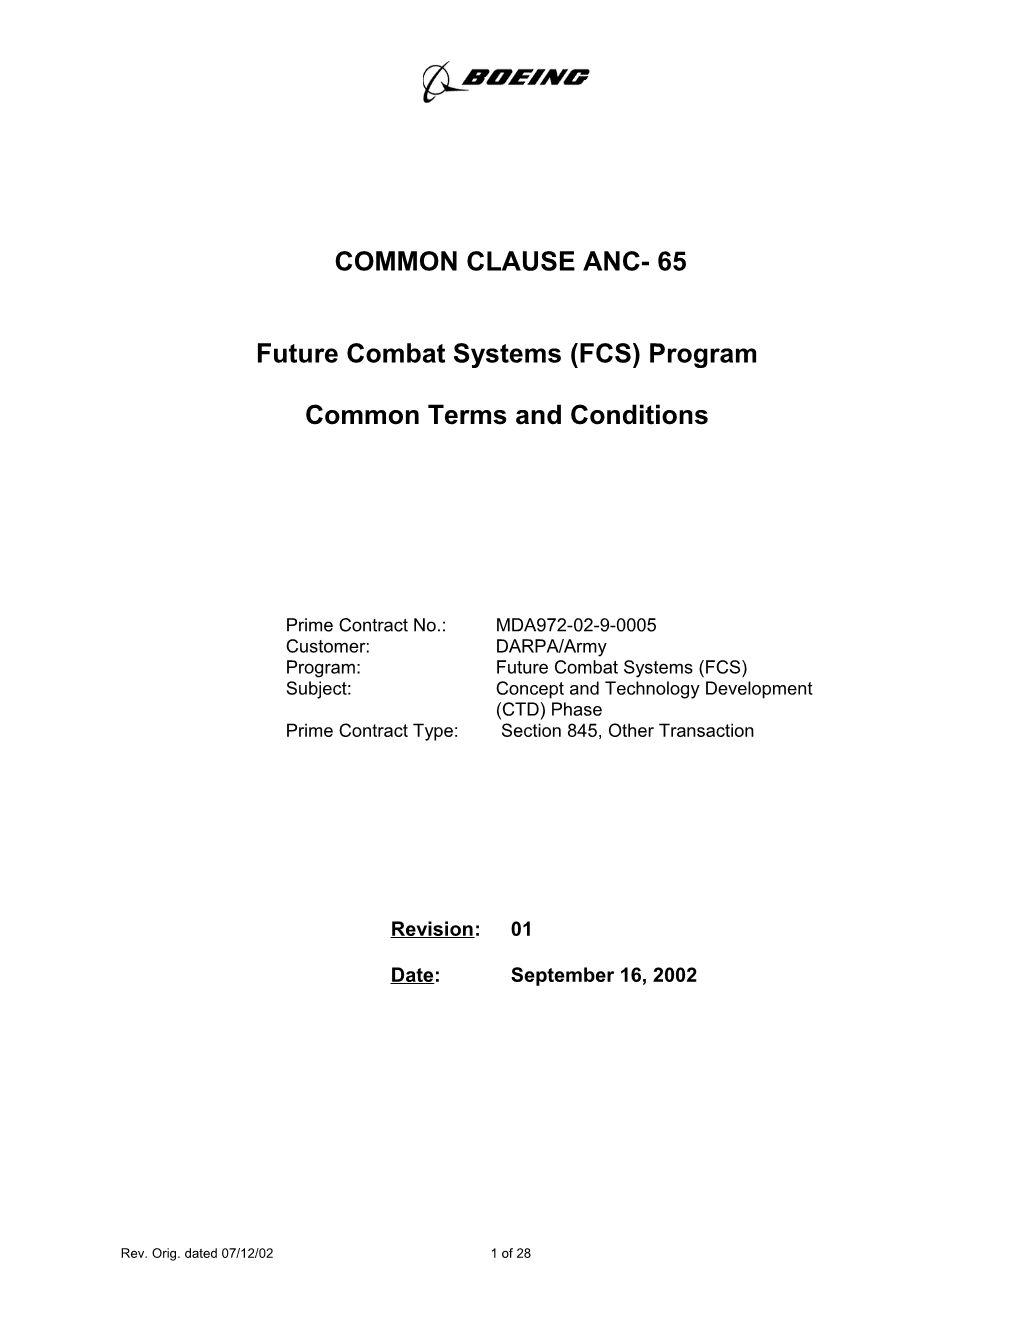 The Following Provisions from Boeing Form D1 4305 1500 (Rev